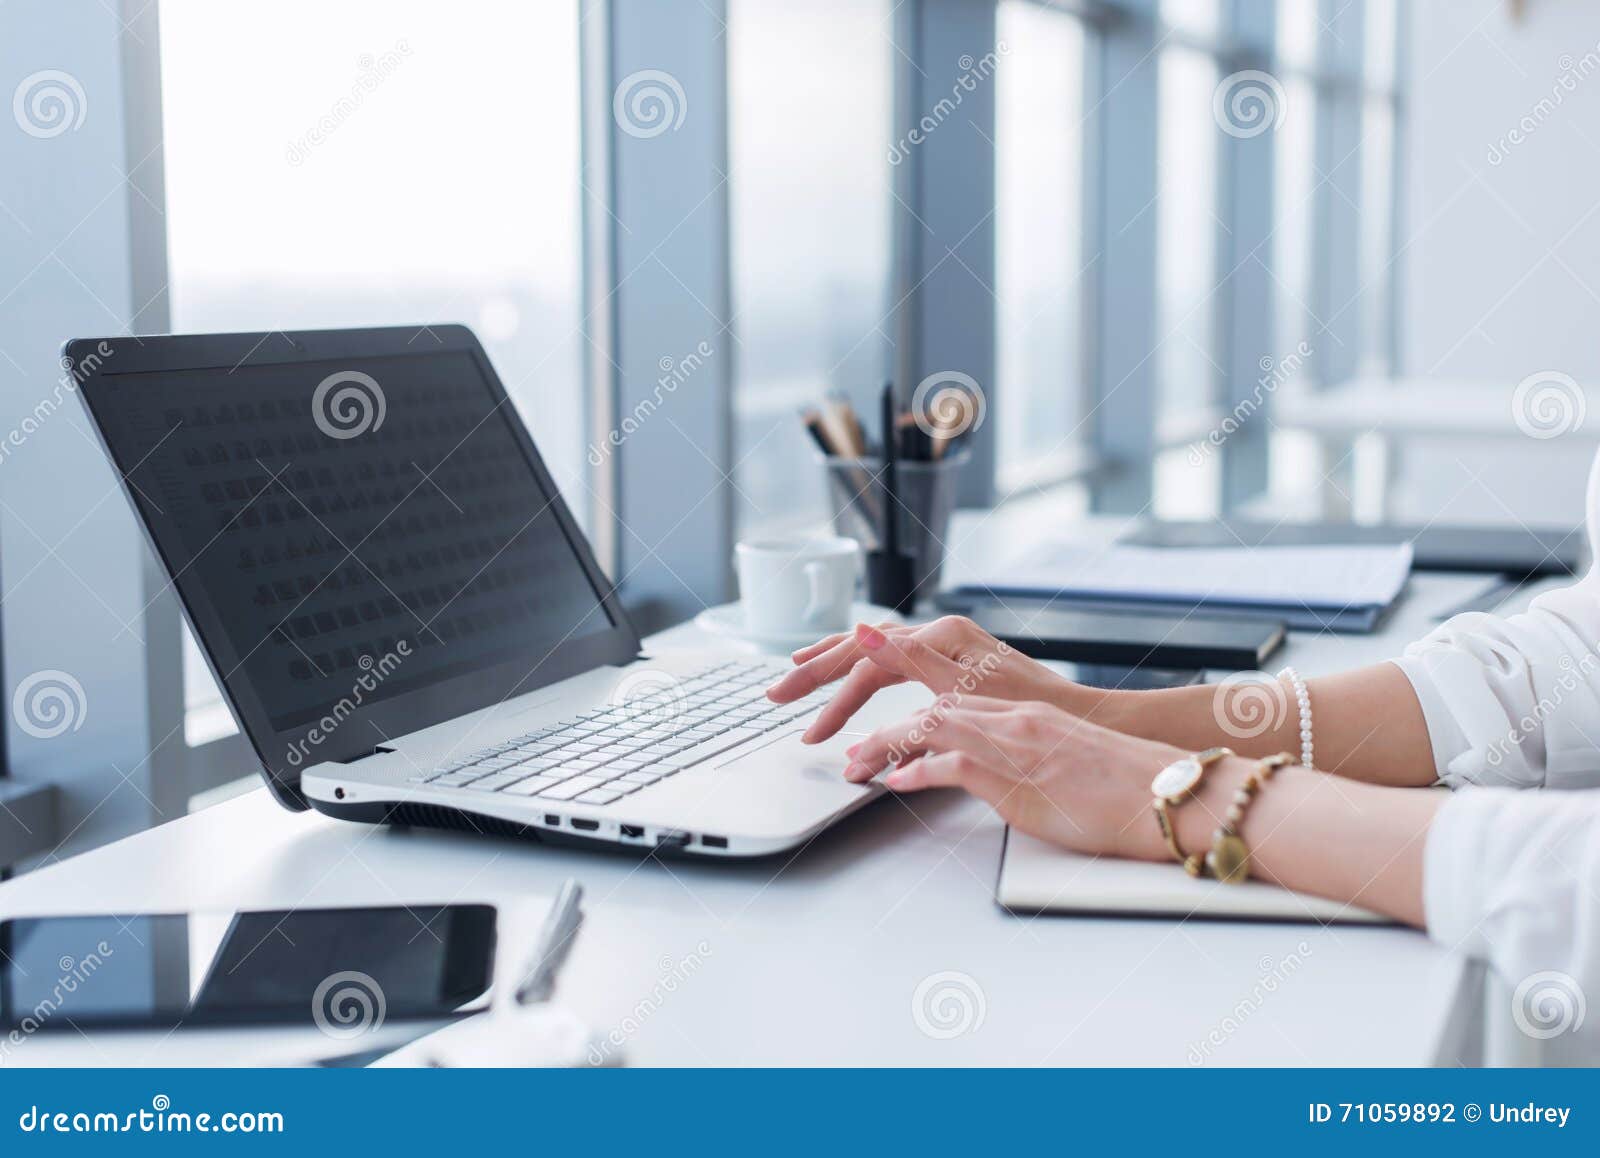 female worker using laptop in office, working with new project. woman blogging at home as a freelancer.